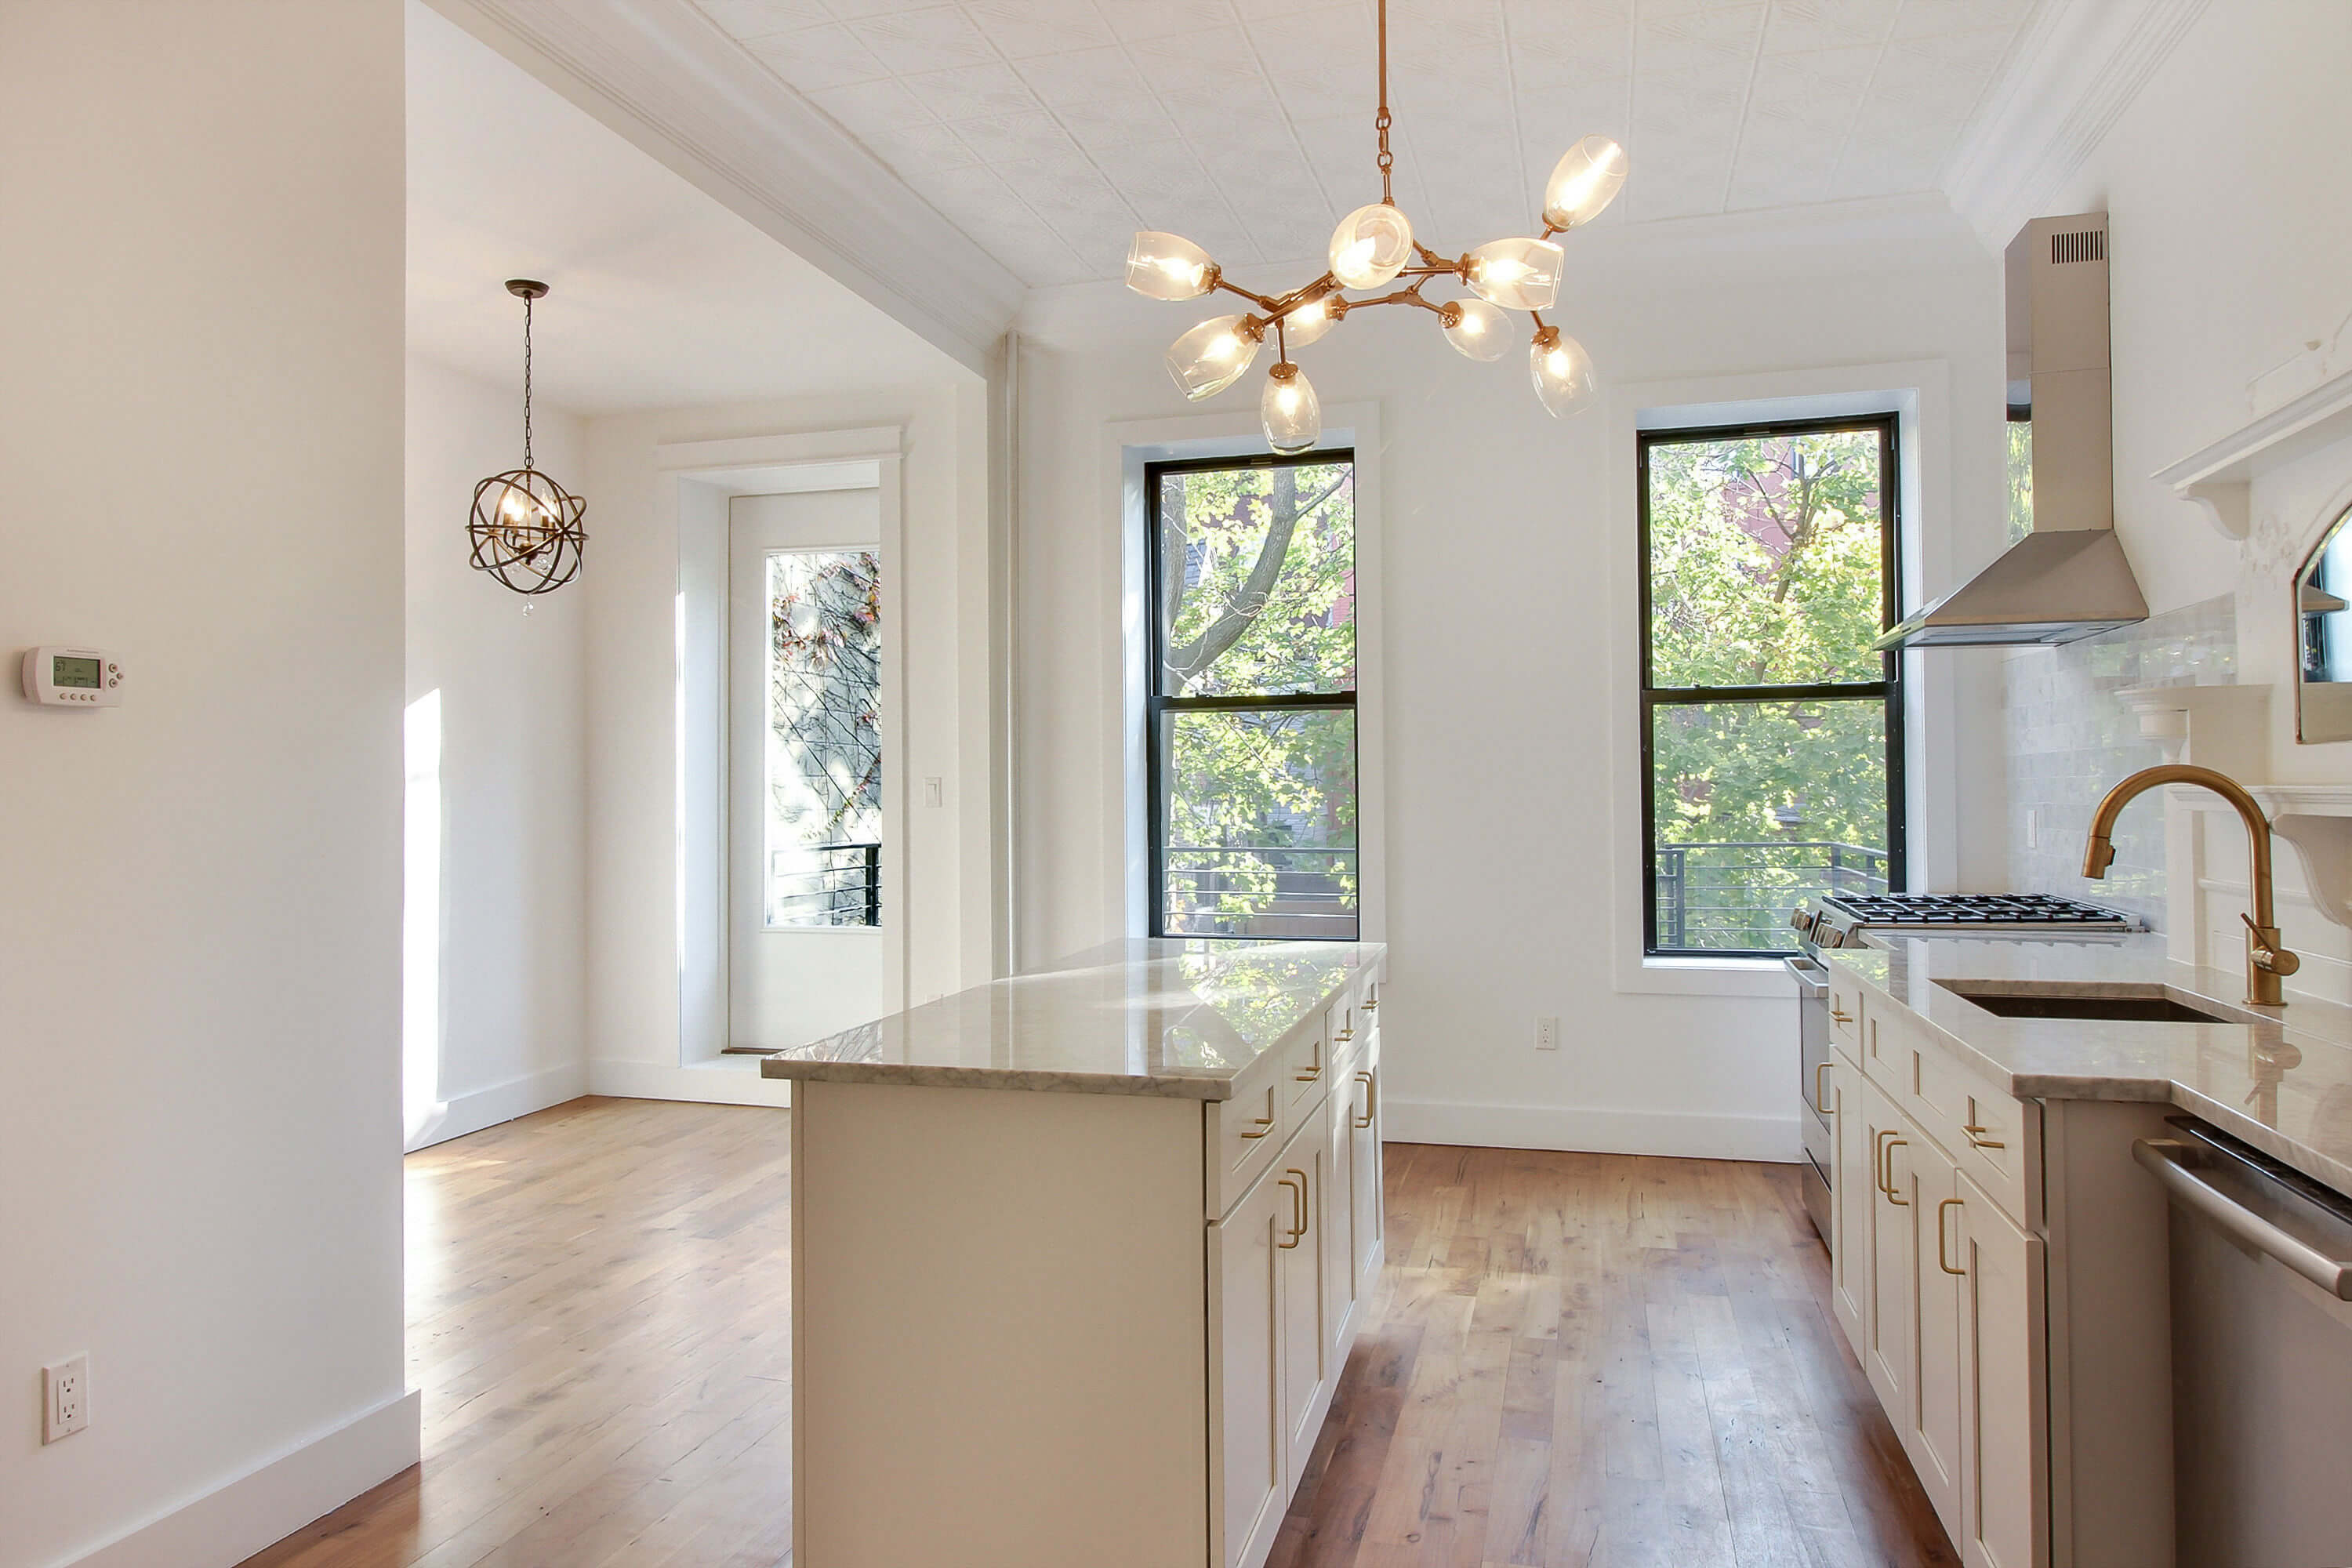 Brooklyn Homes for Sale in Vinegar Hill, Crown Heights, Bed Stuy, Brownsville